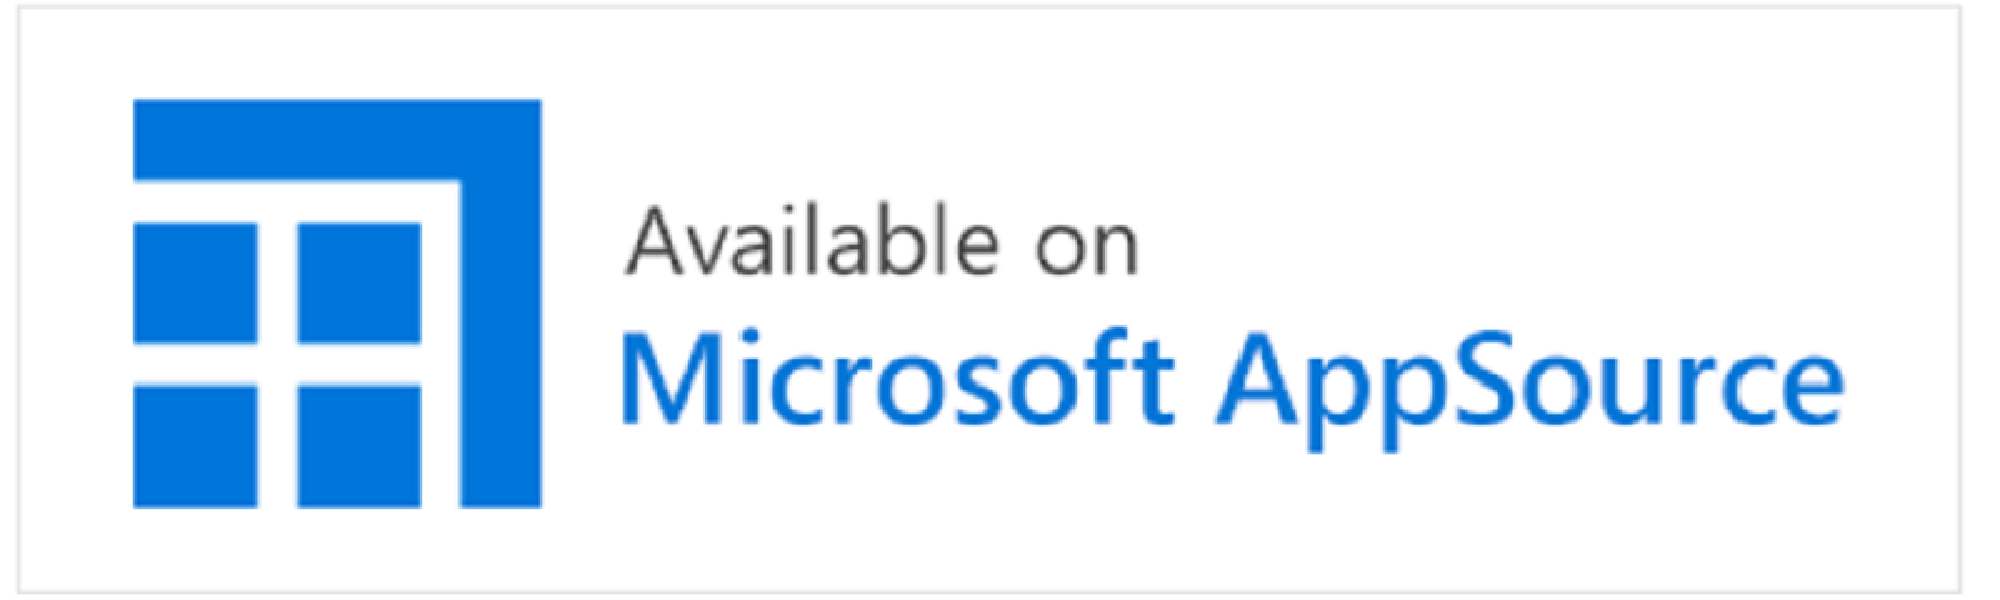 Approved on Microsoft AppSource 